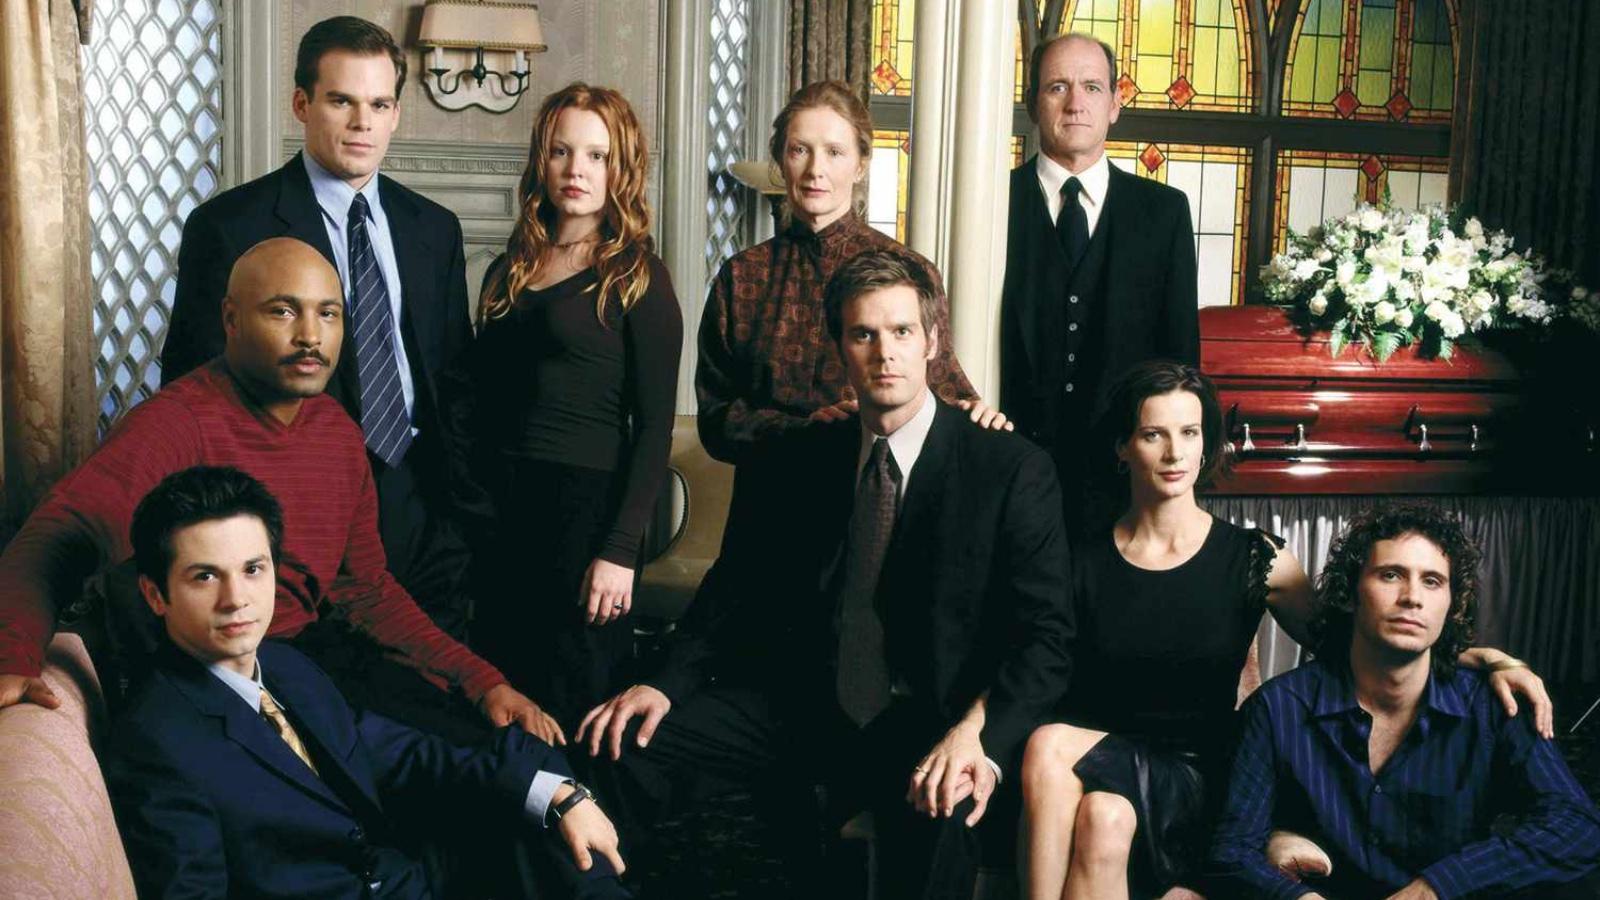 The cast of Six Feet Under including Michael C. Hall.